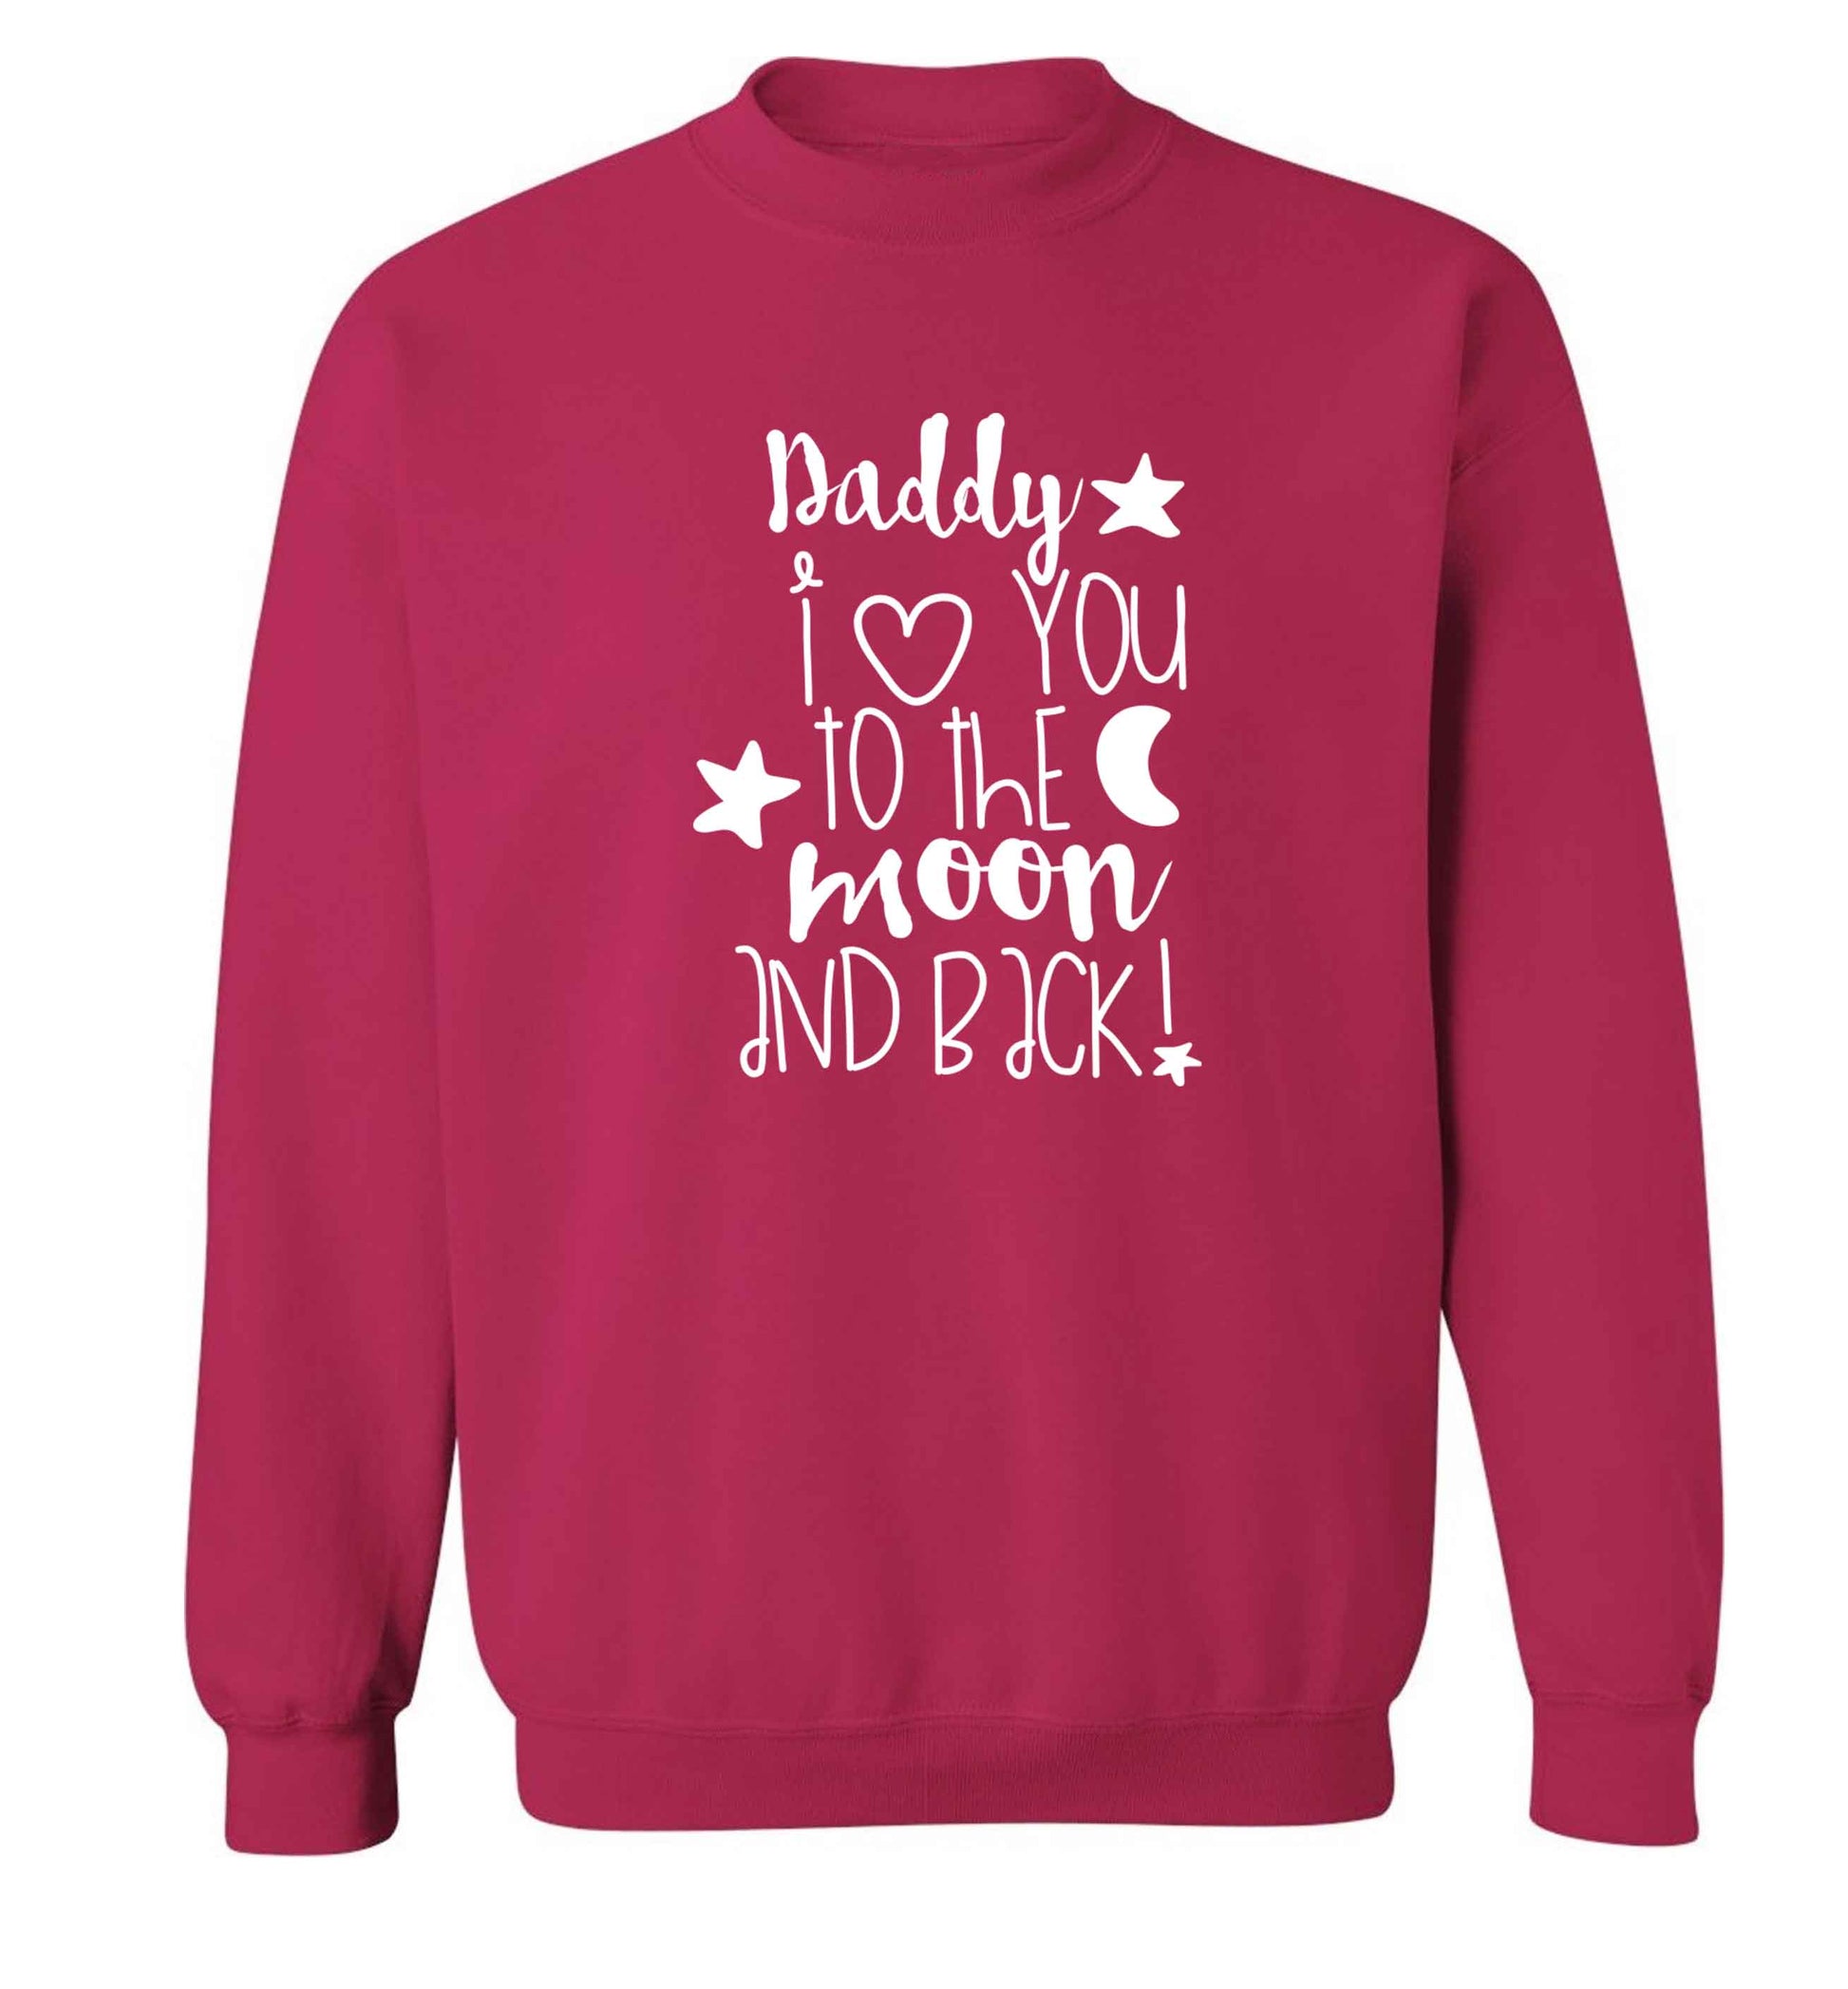 Daddy I love you to the moon and back adult's unisex pink sweater 2XL